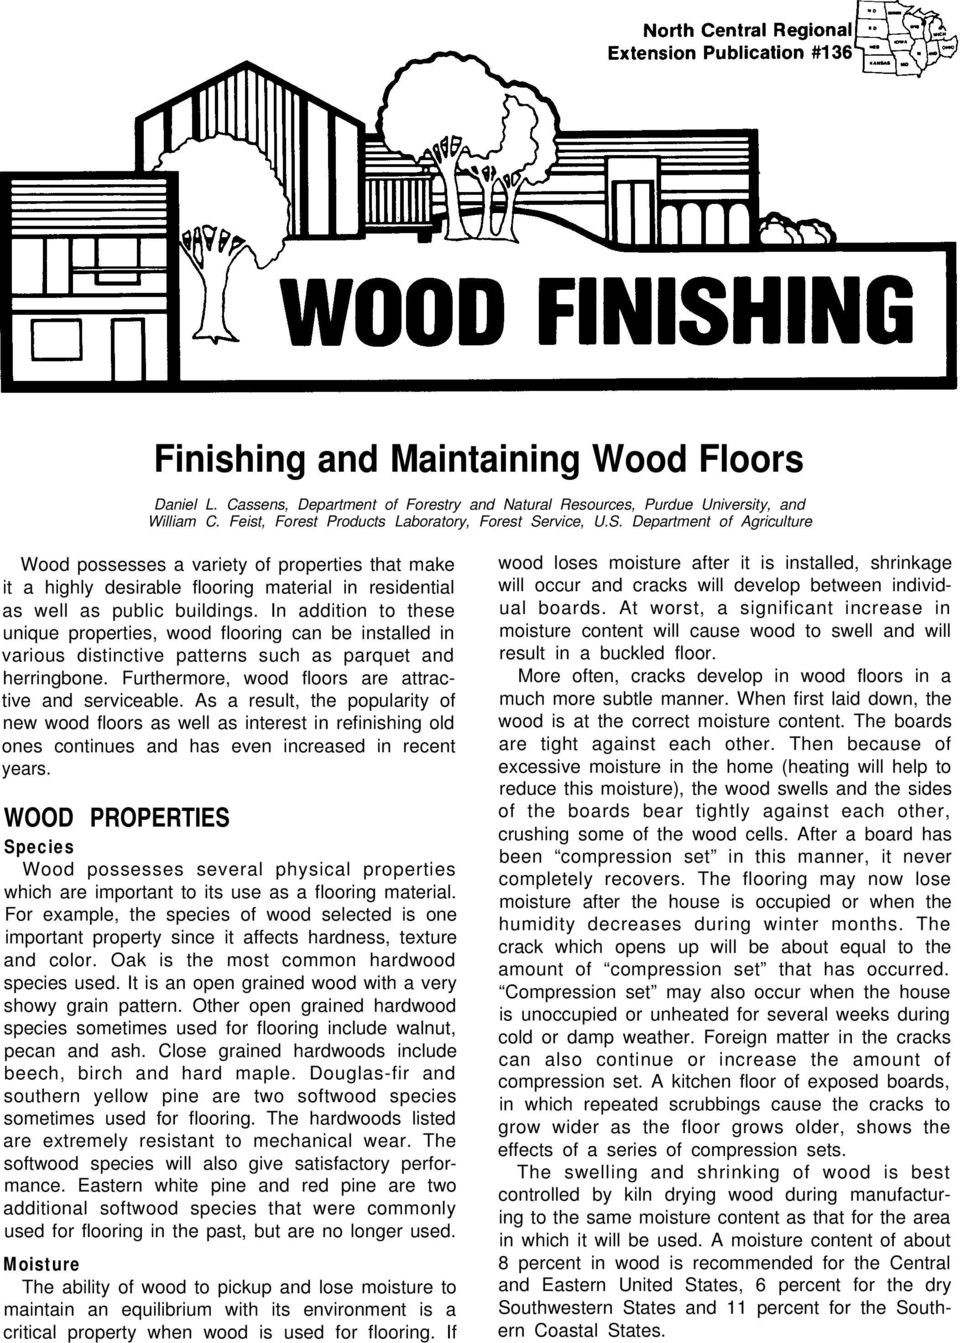 26 Fabulous Hardwood Floor Refinishing Cost Philadelphia 2024 free download hardwood floor refinishing cost philadelphia of finishing and maintaining wood floors pdf pertaining to in addition to these unique properties wood flooring can be installed in various disti